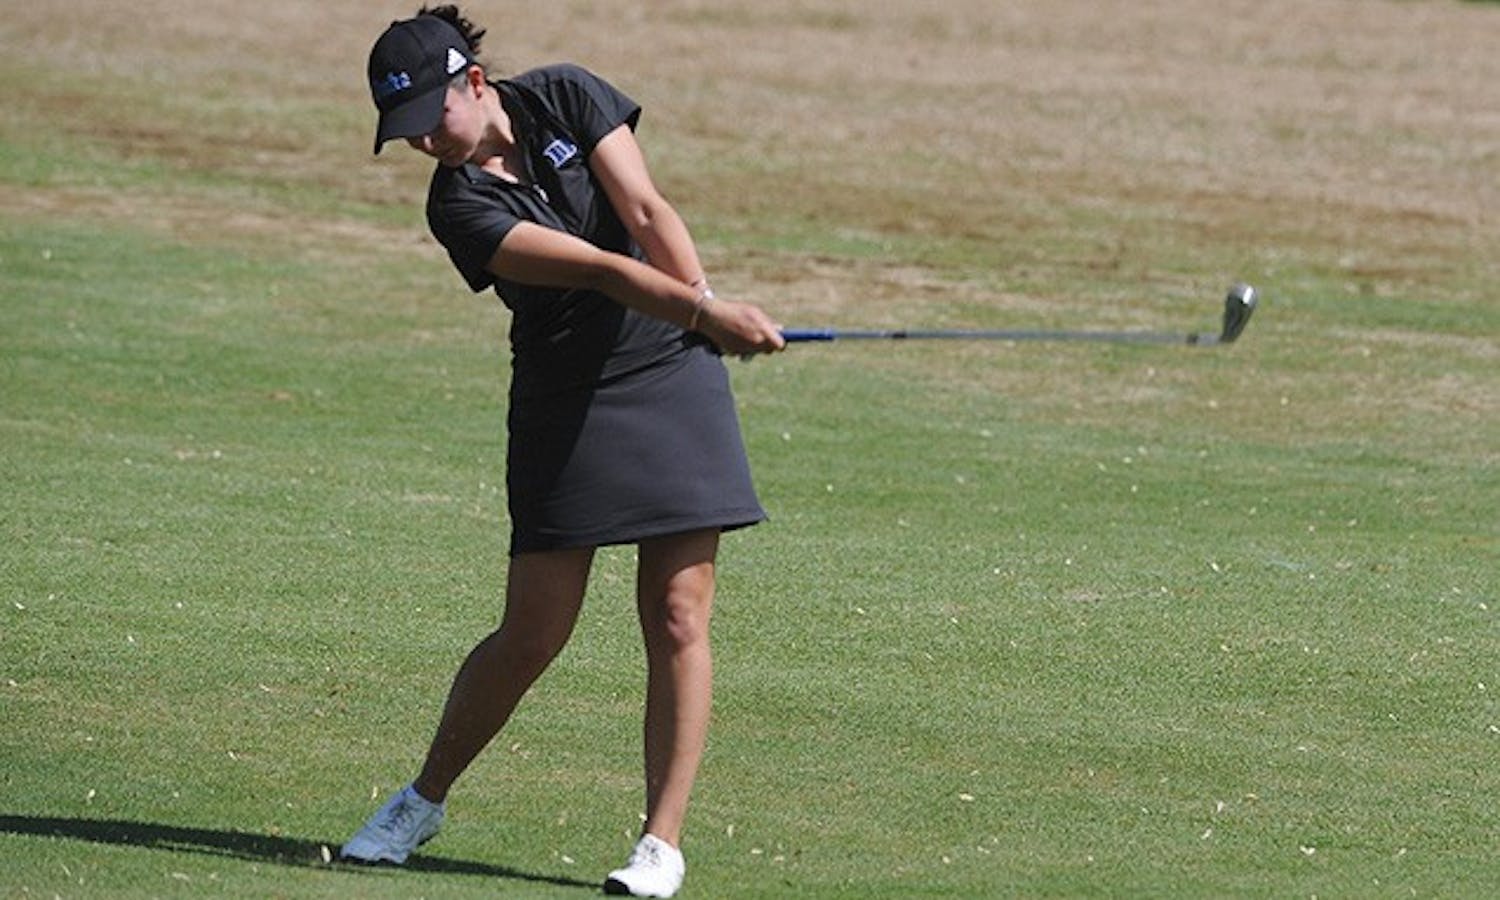 Lindy Duncan shot a 70 on the final day to move up to fourth place in the individual standings.